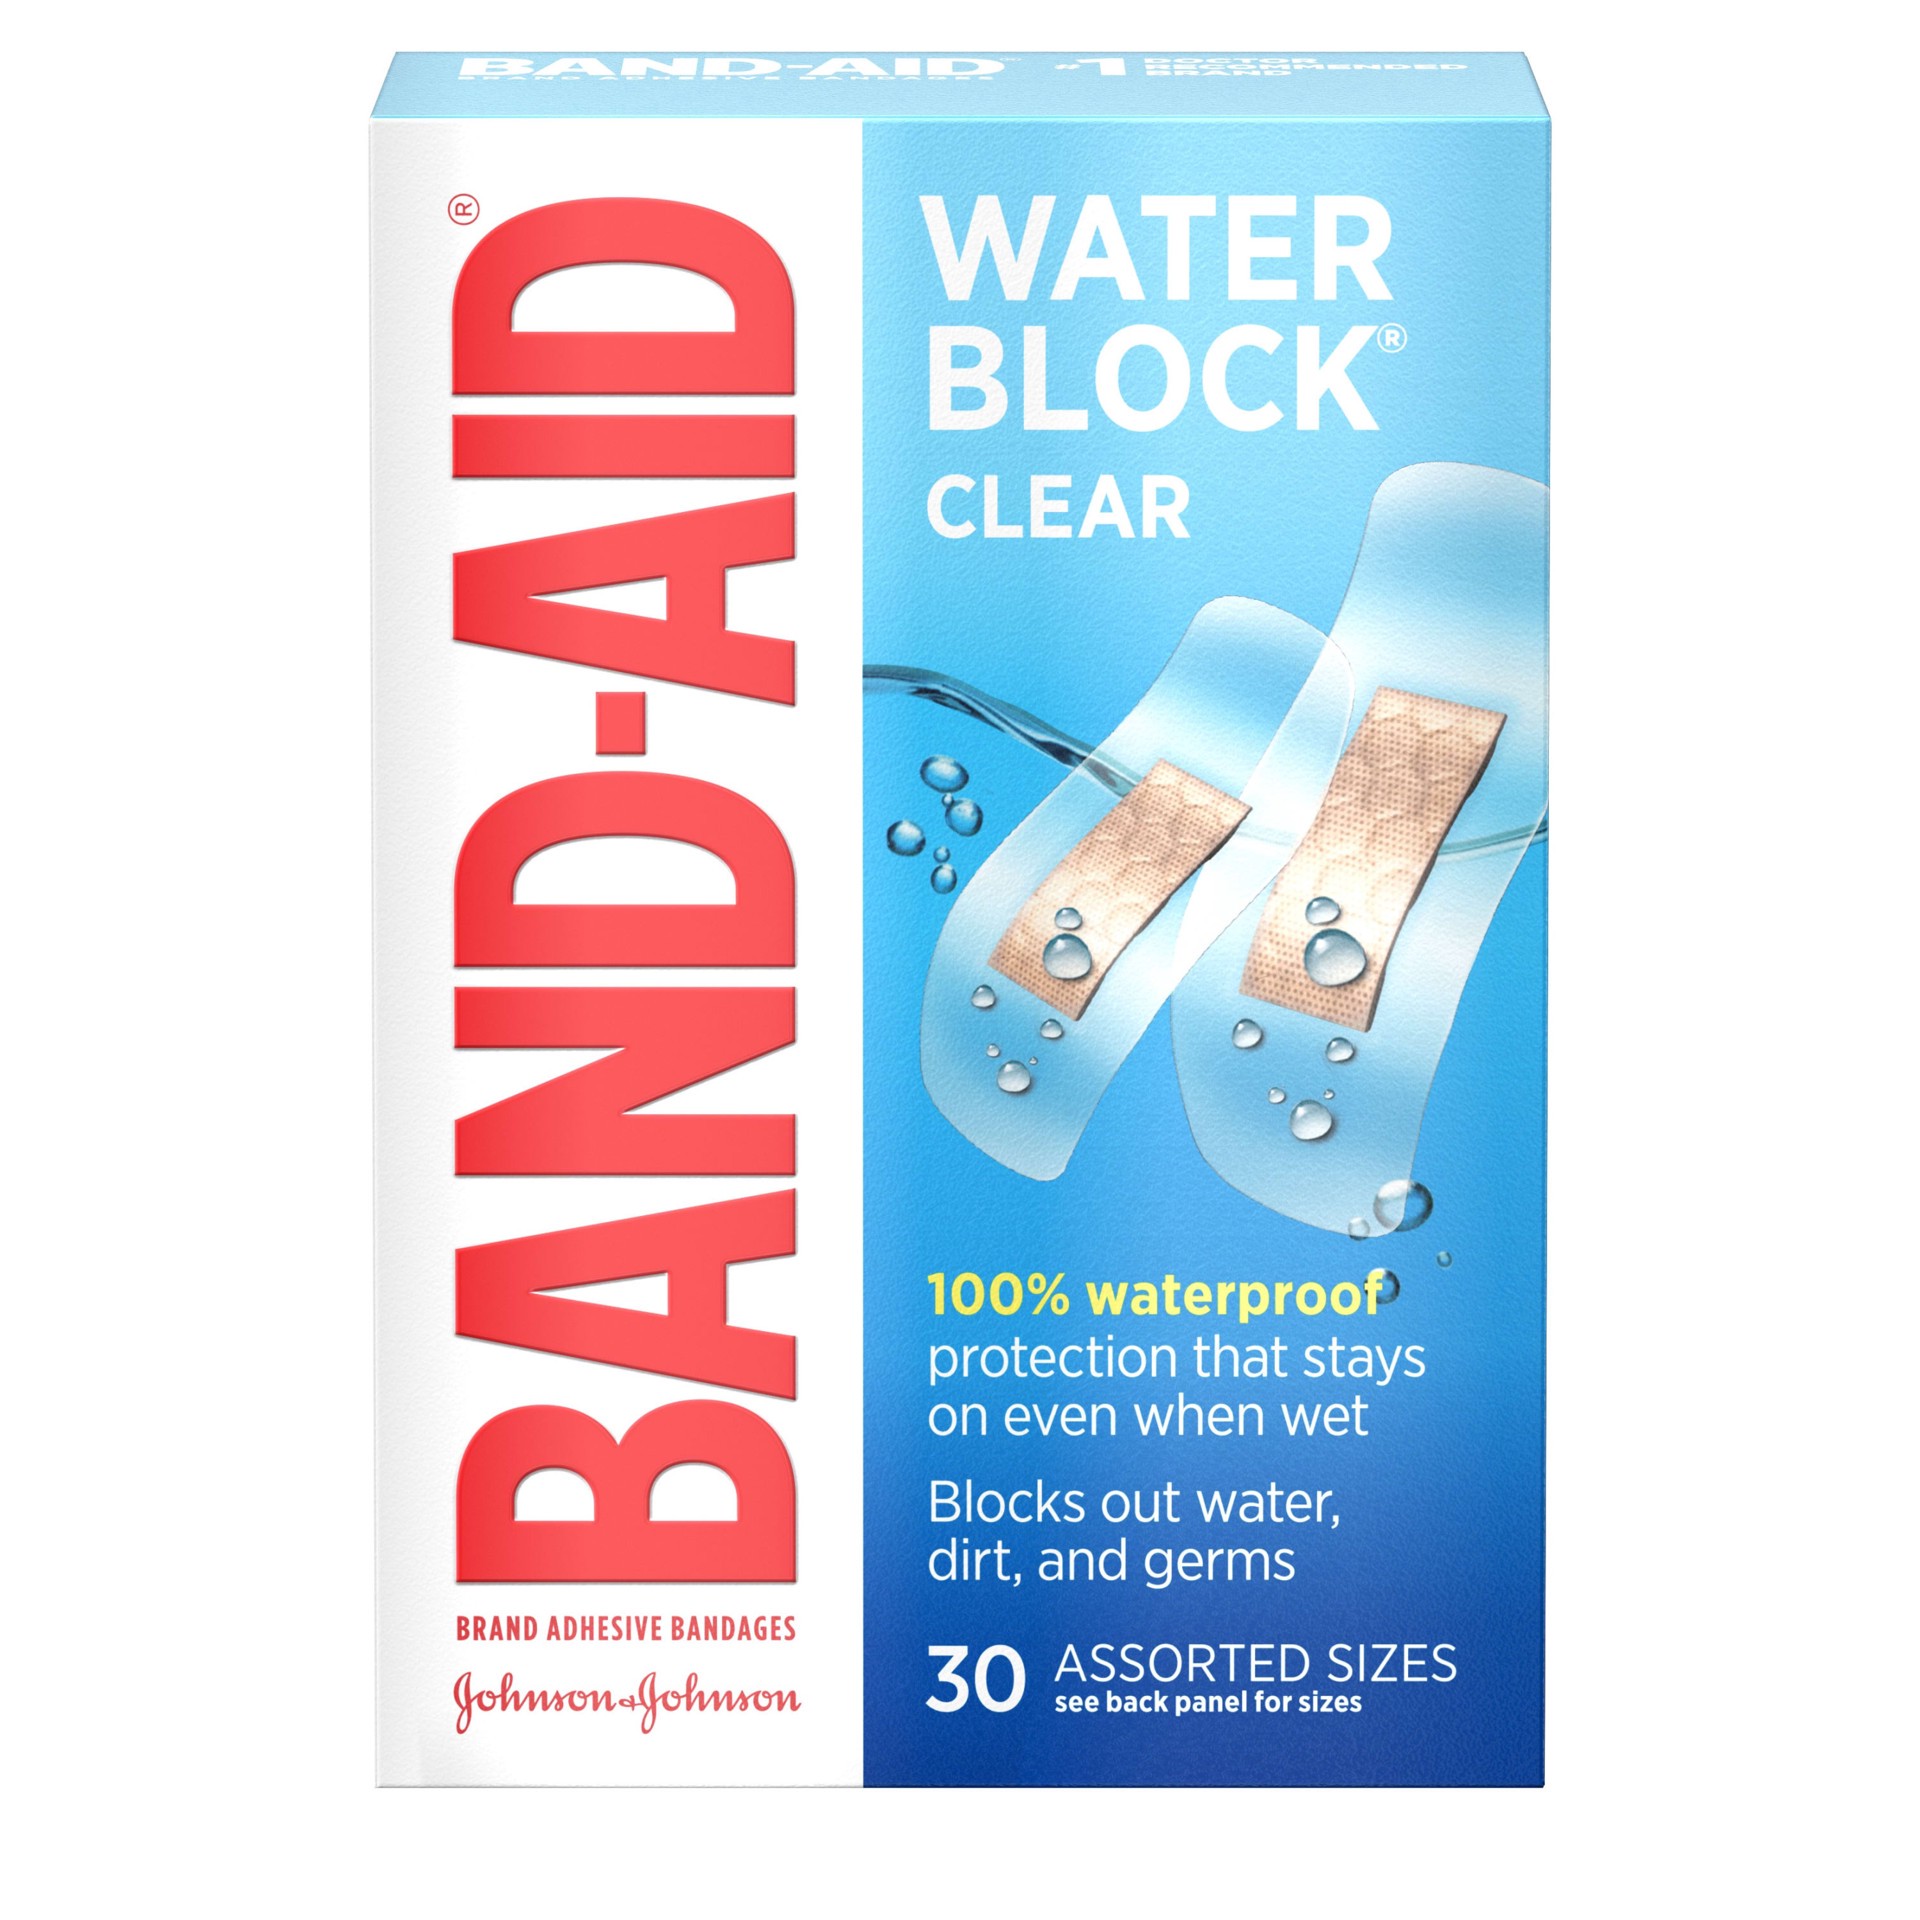 slide 1 of 8, BAND-AID Water Block Clear Waterproof Sterile Adhesive Bandages for First-Aid Care of Minor Wounds, Cuts, Scrapes & Burns, Quilt-Aid Pad to Cushion Wounds, Assorted Sizes, 30 ct, 30 ct